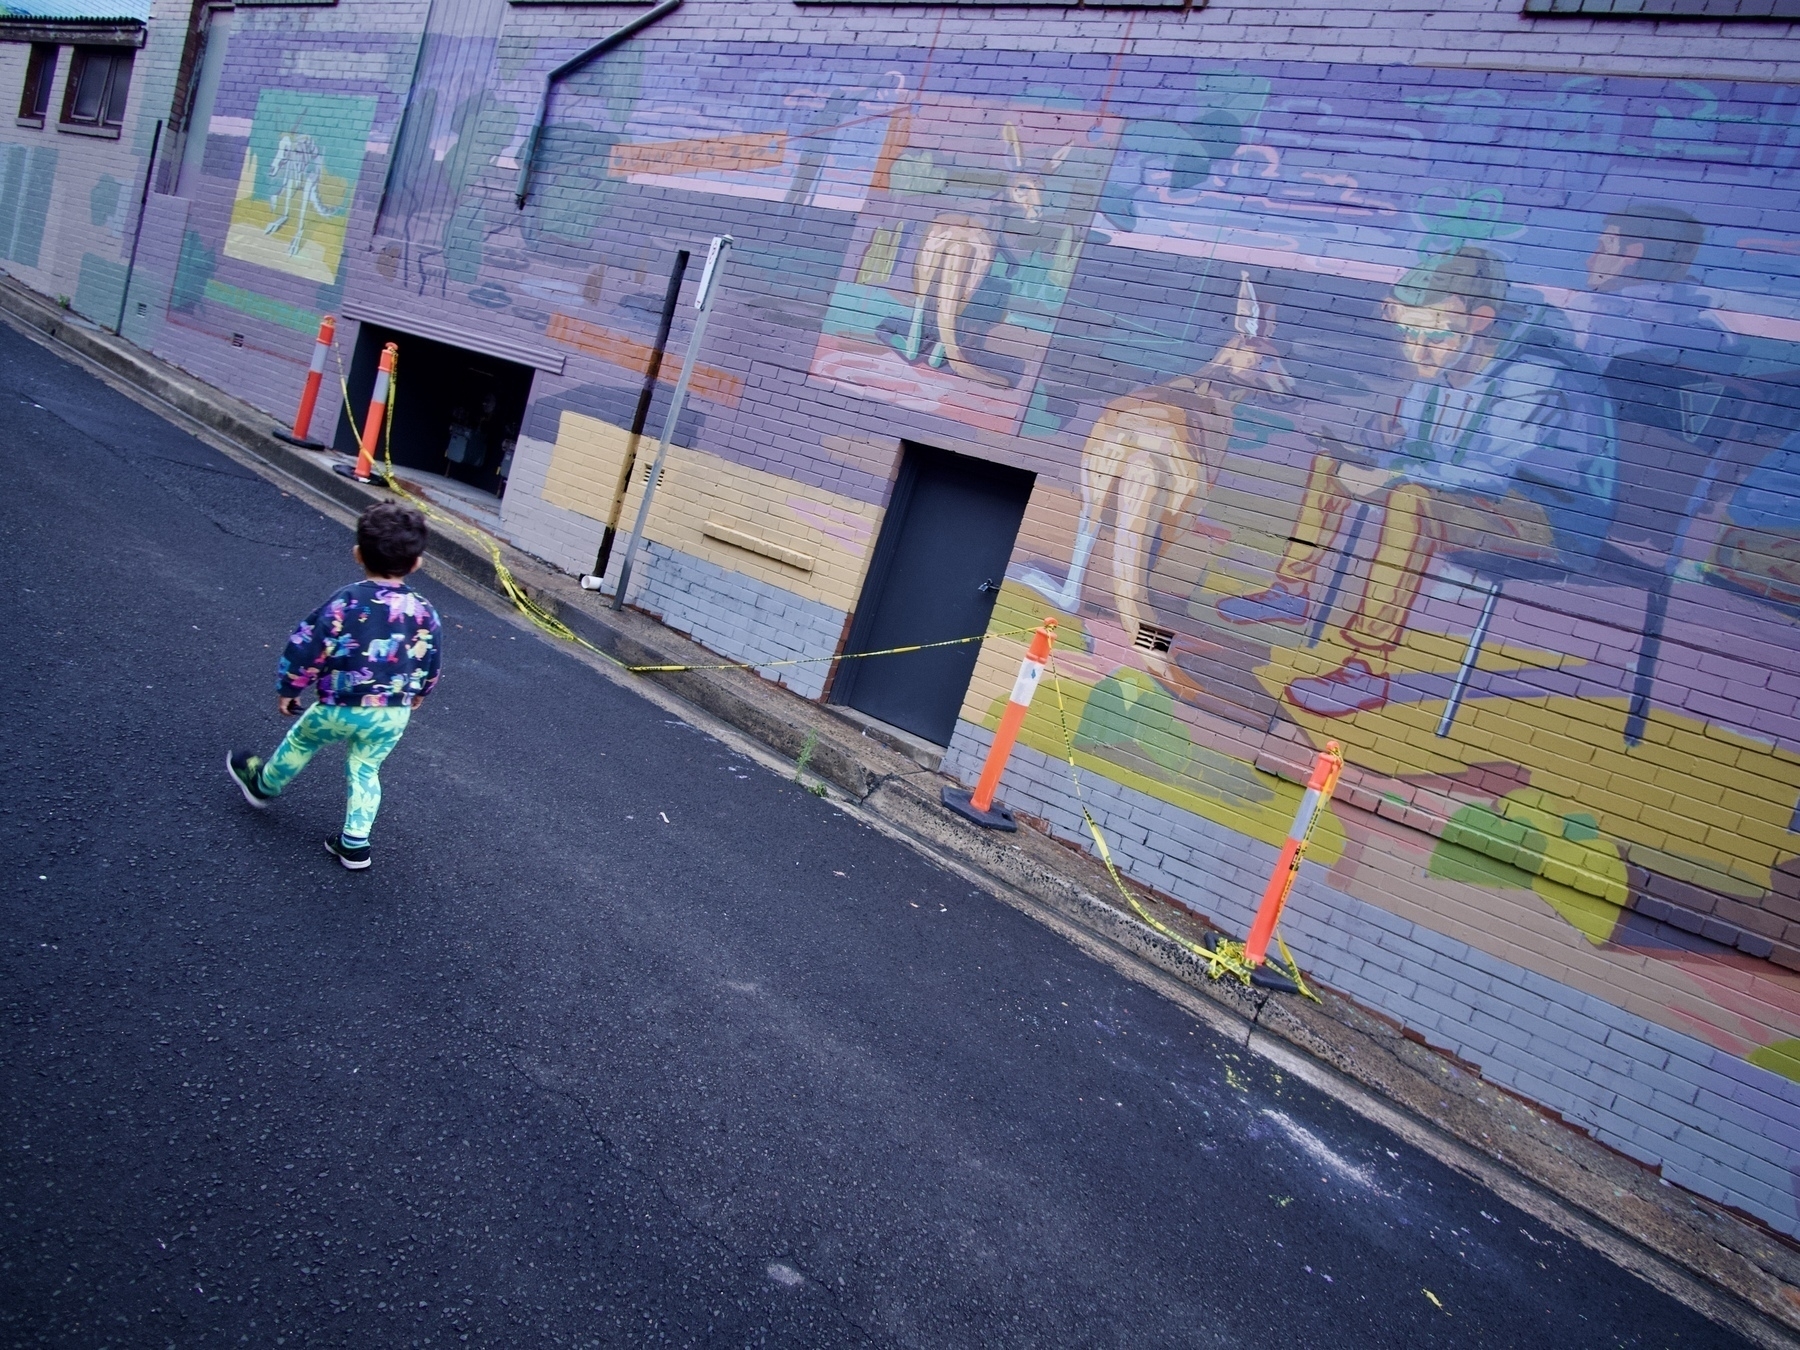 A toddler walks past a mural that features kangaroos.